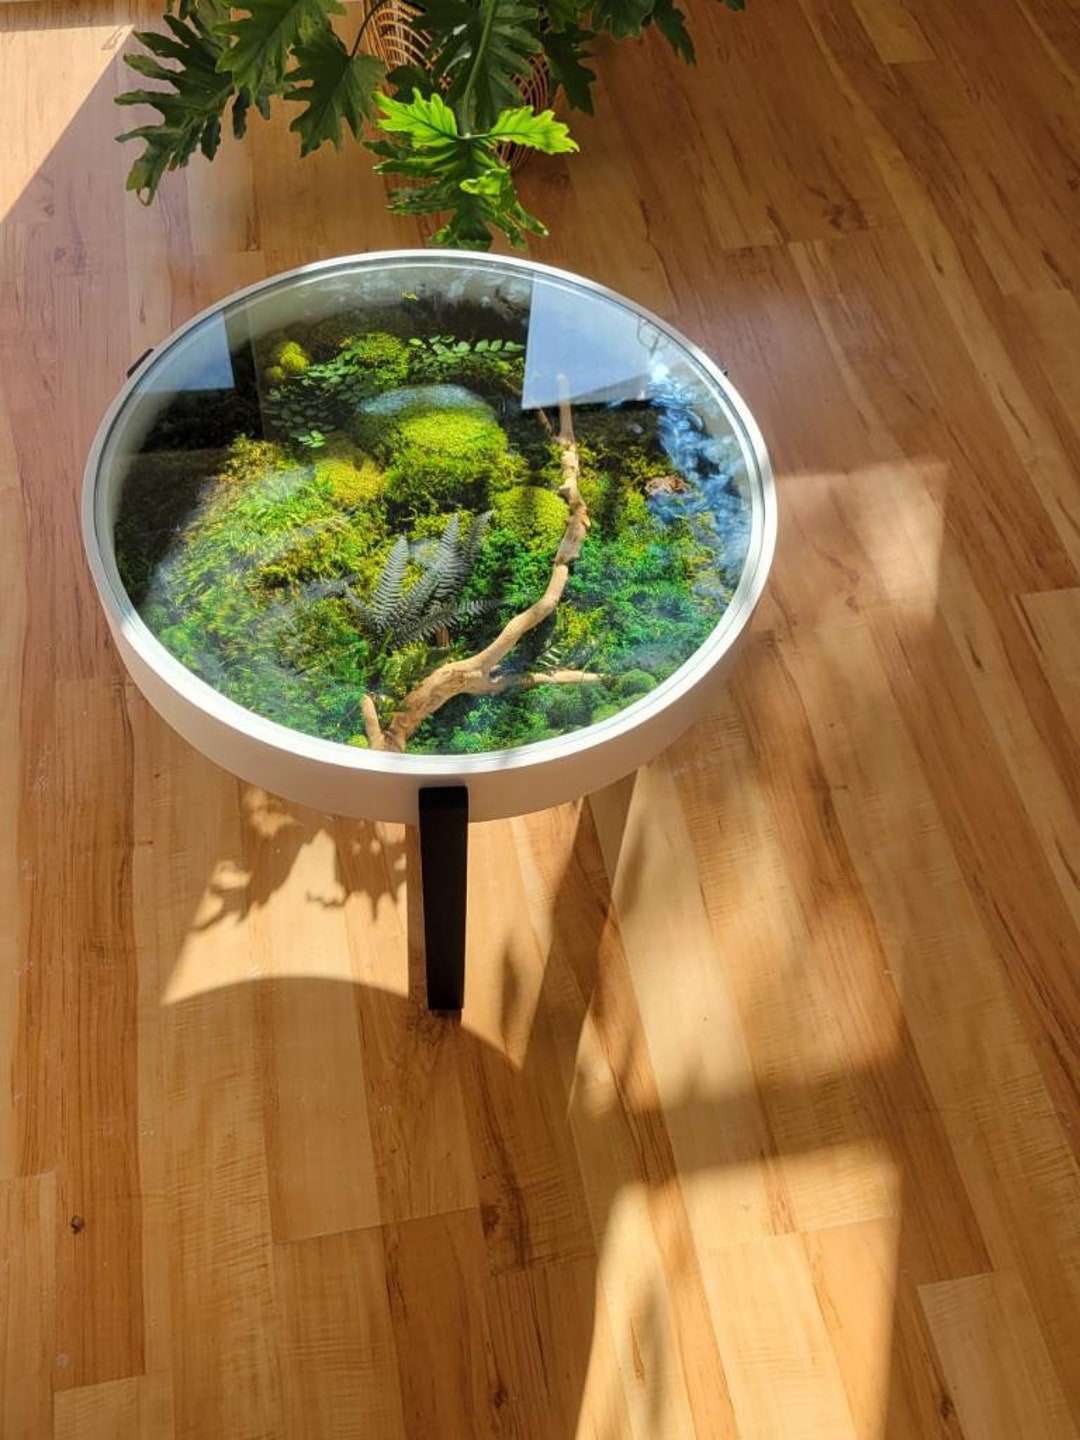 Terrarium Coffee Tables: The Green Oasis Your Home Has Been Missing –  Inspiring Designs